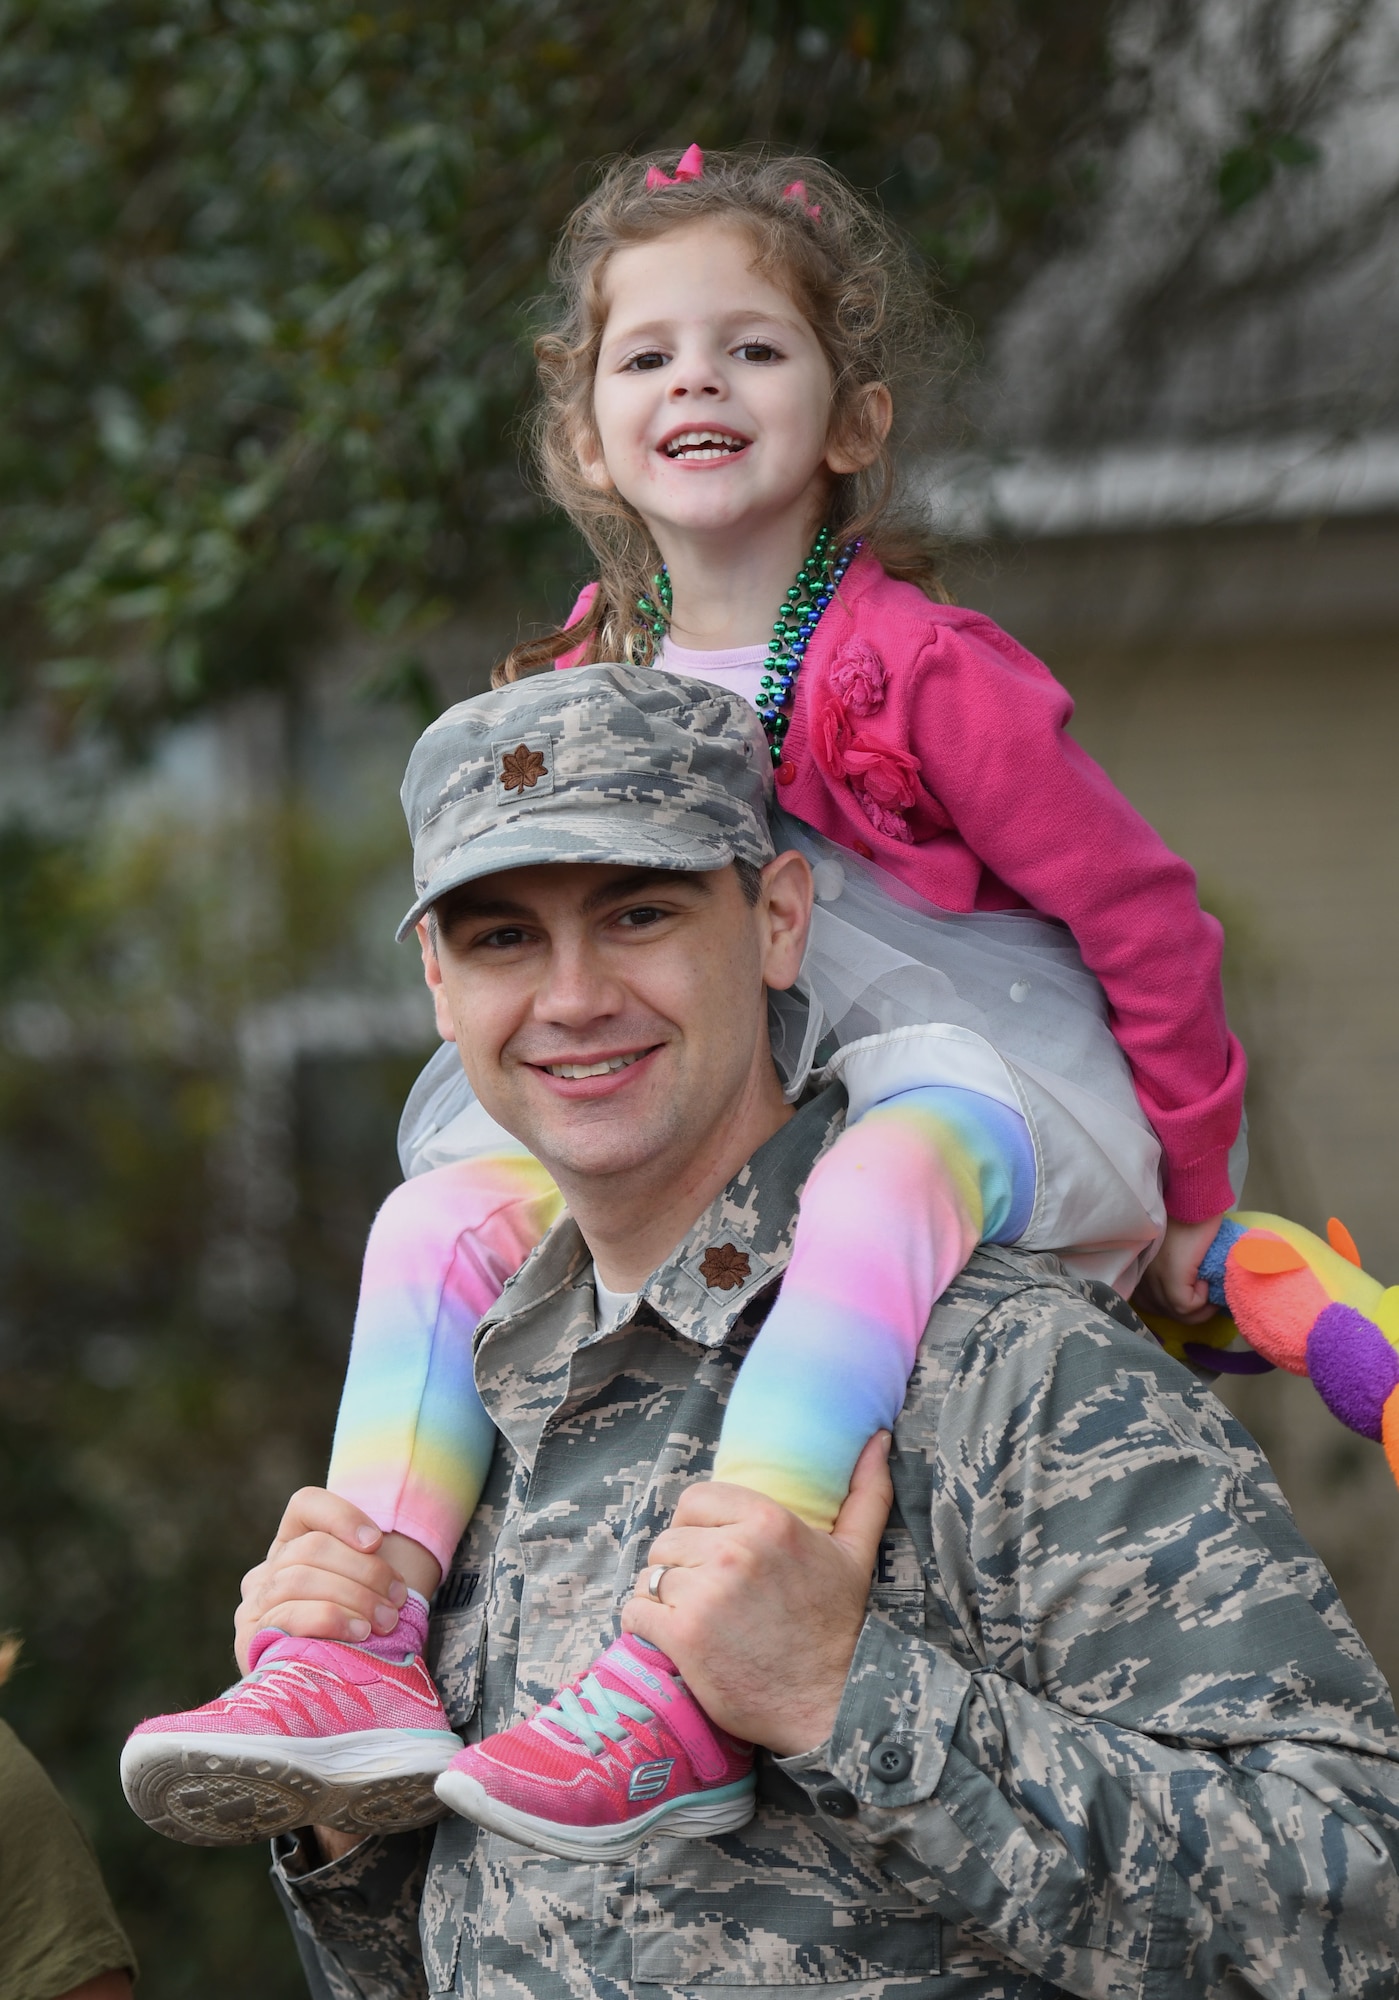 Maj. Garrett Miller, 81st Medical Group physician assistant program director, and his daughter, Reagan, attend the Jeff Davis Elementary School Mardi Gras parade Feb. 9, 2018, in Biloxi, Mississippi. Keesler leadership and other base personnel participated in the festivities. (U.S. Air Force photo by Kemberly Groue)